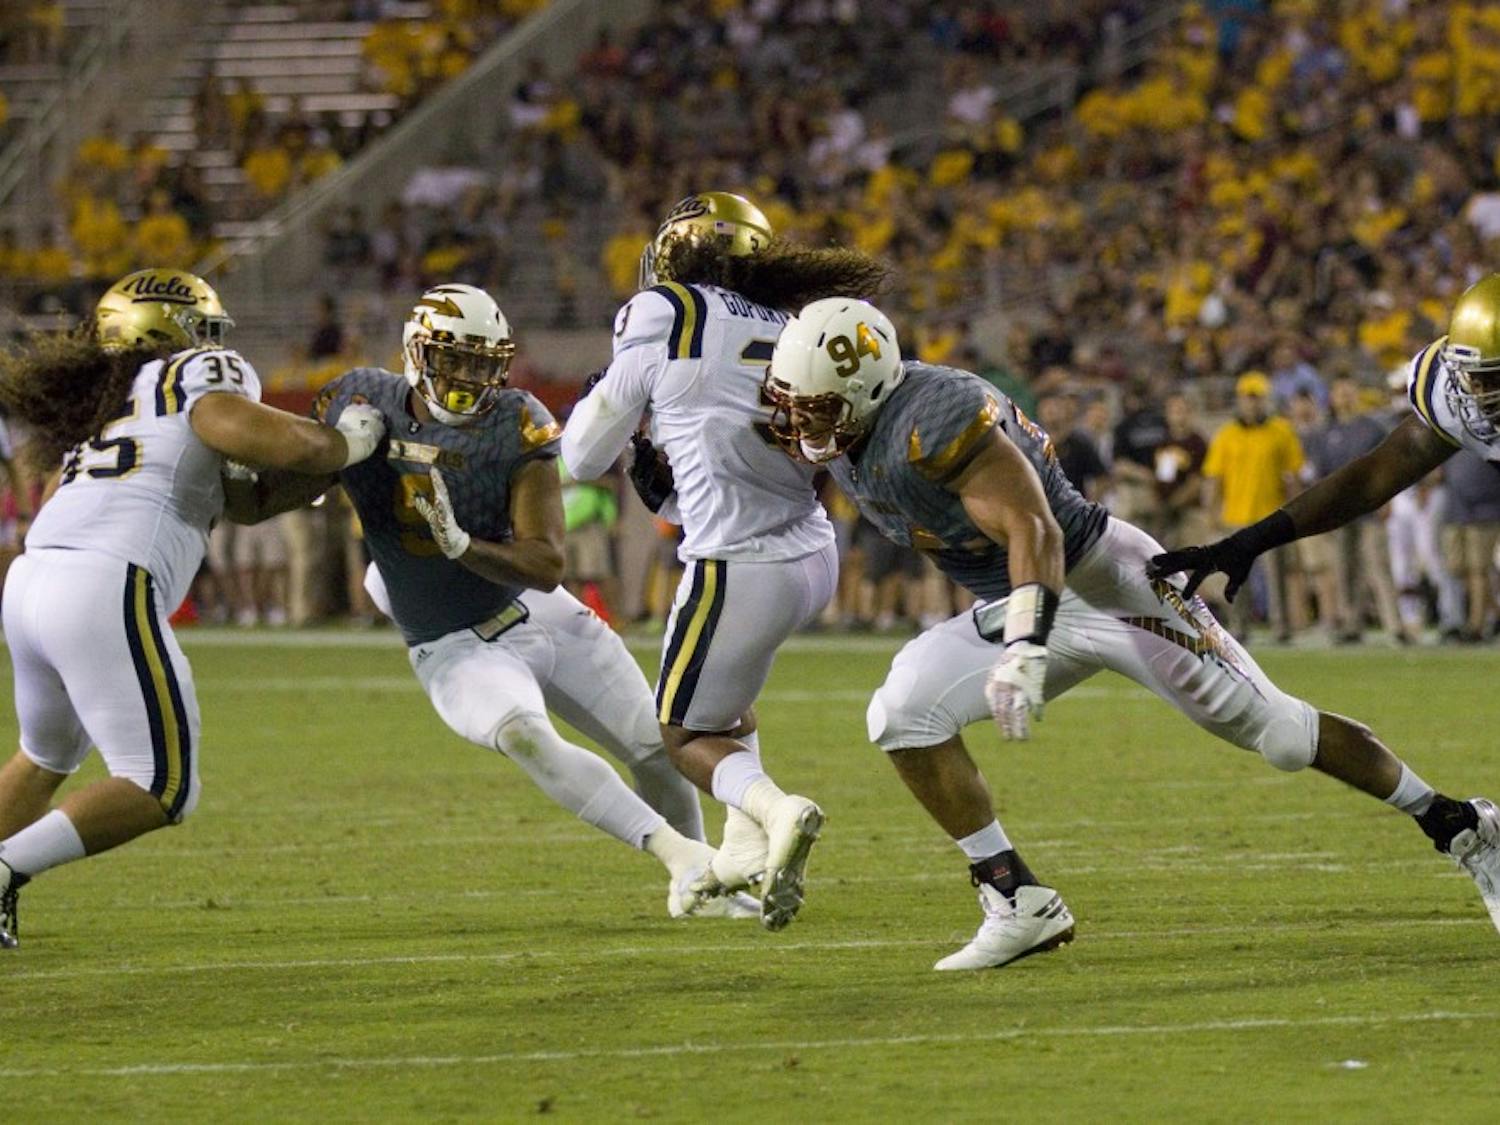 ASU junior defensive lineman Christian Hill (94) makes a tackle during a kickoff in the second half of the 23-20 victory over the UCLA Bruins in Sun Devil Stadium in Tempe, Arizona, on Saturday, Oct. 8, 2016.